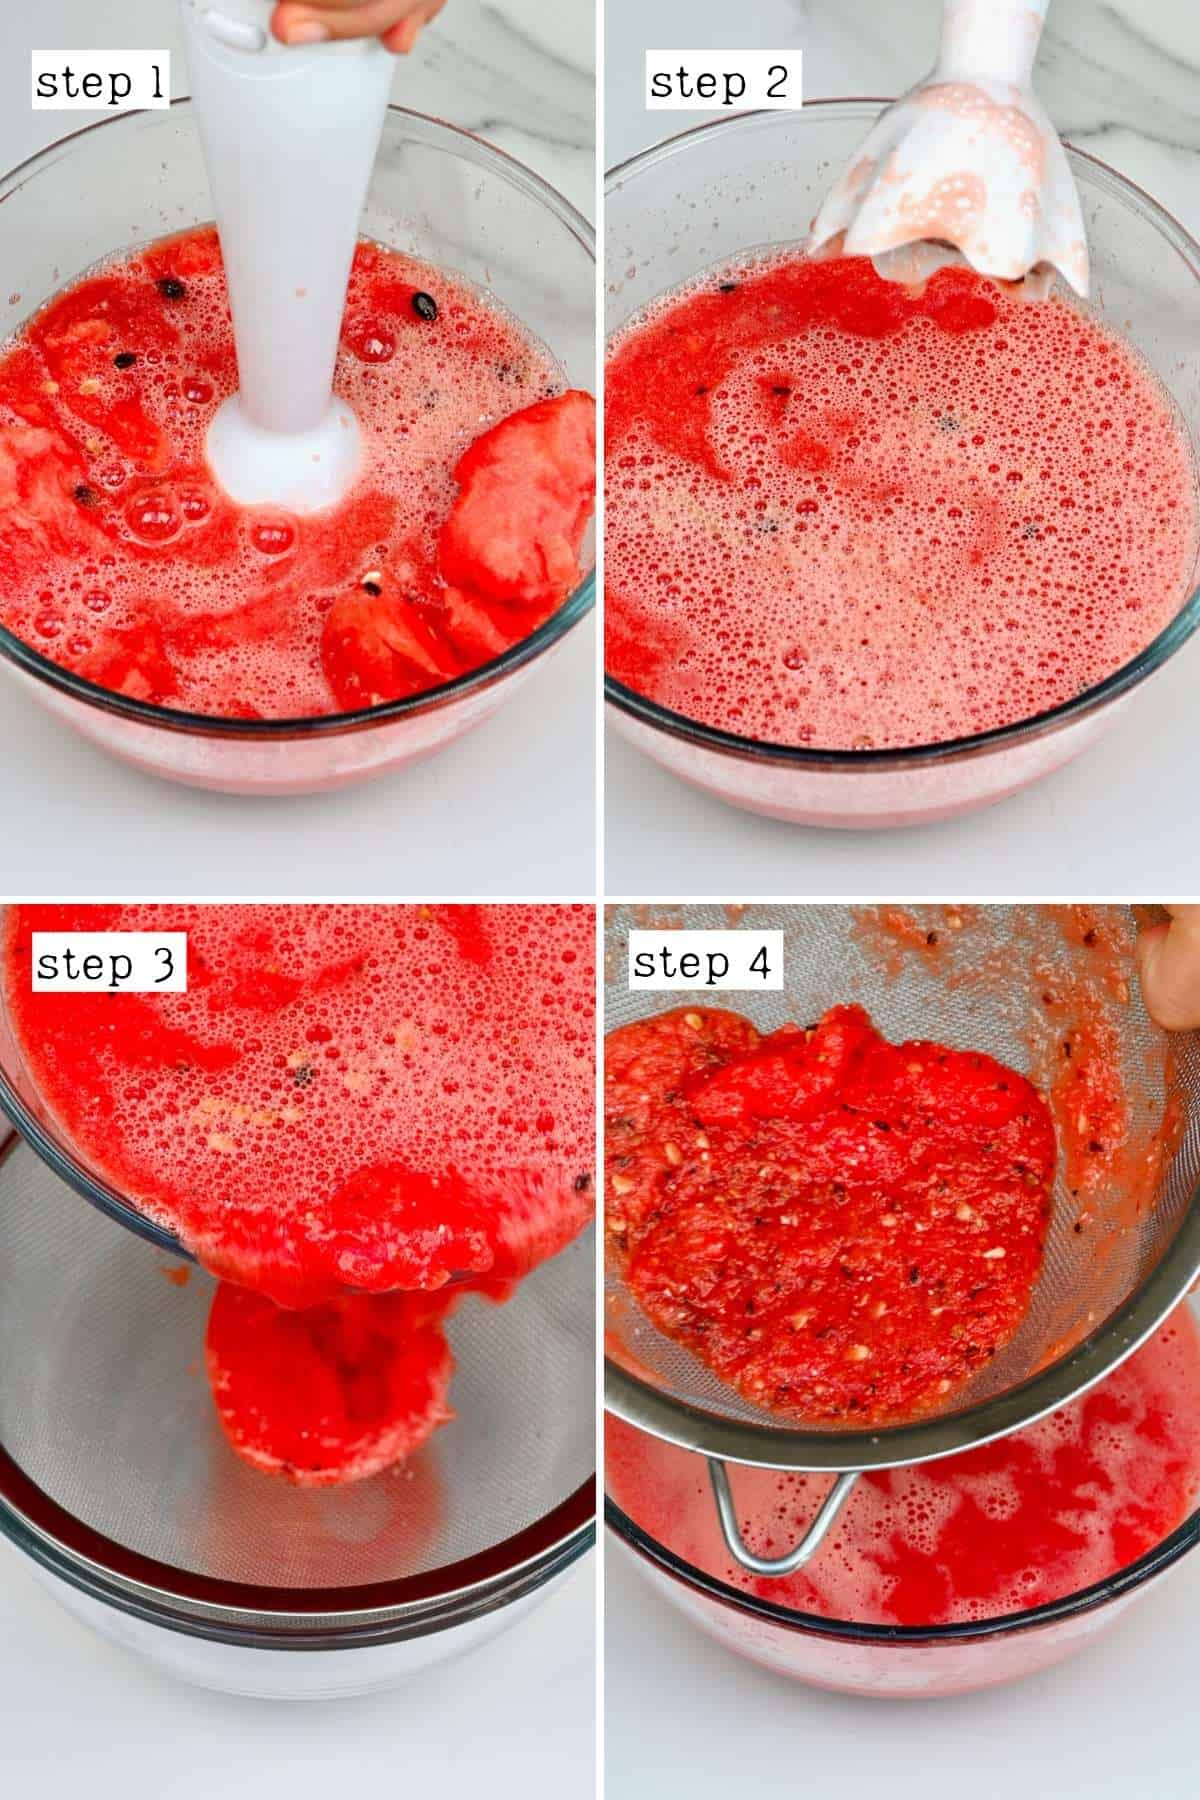 Steps for juicing watermelon with a mixer